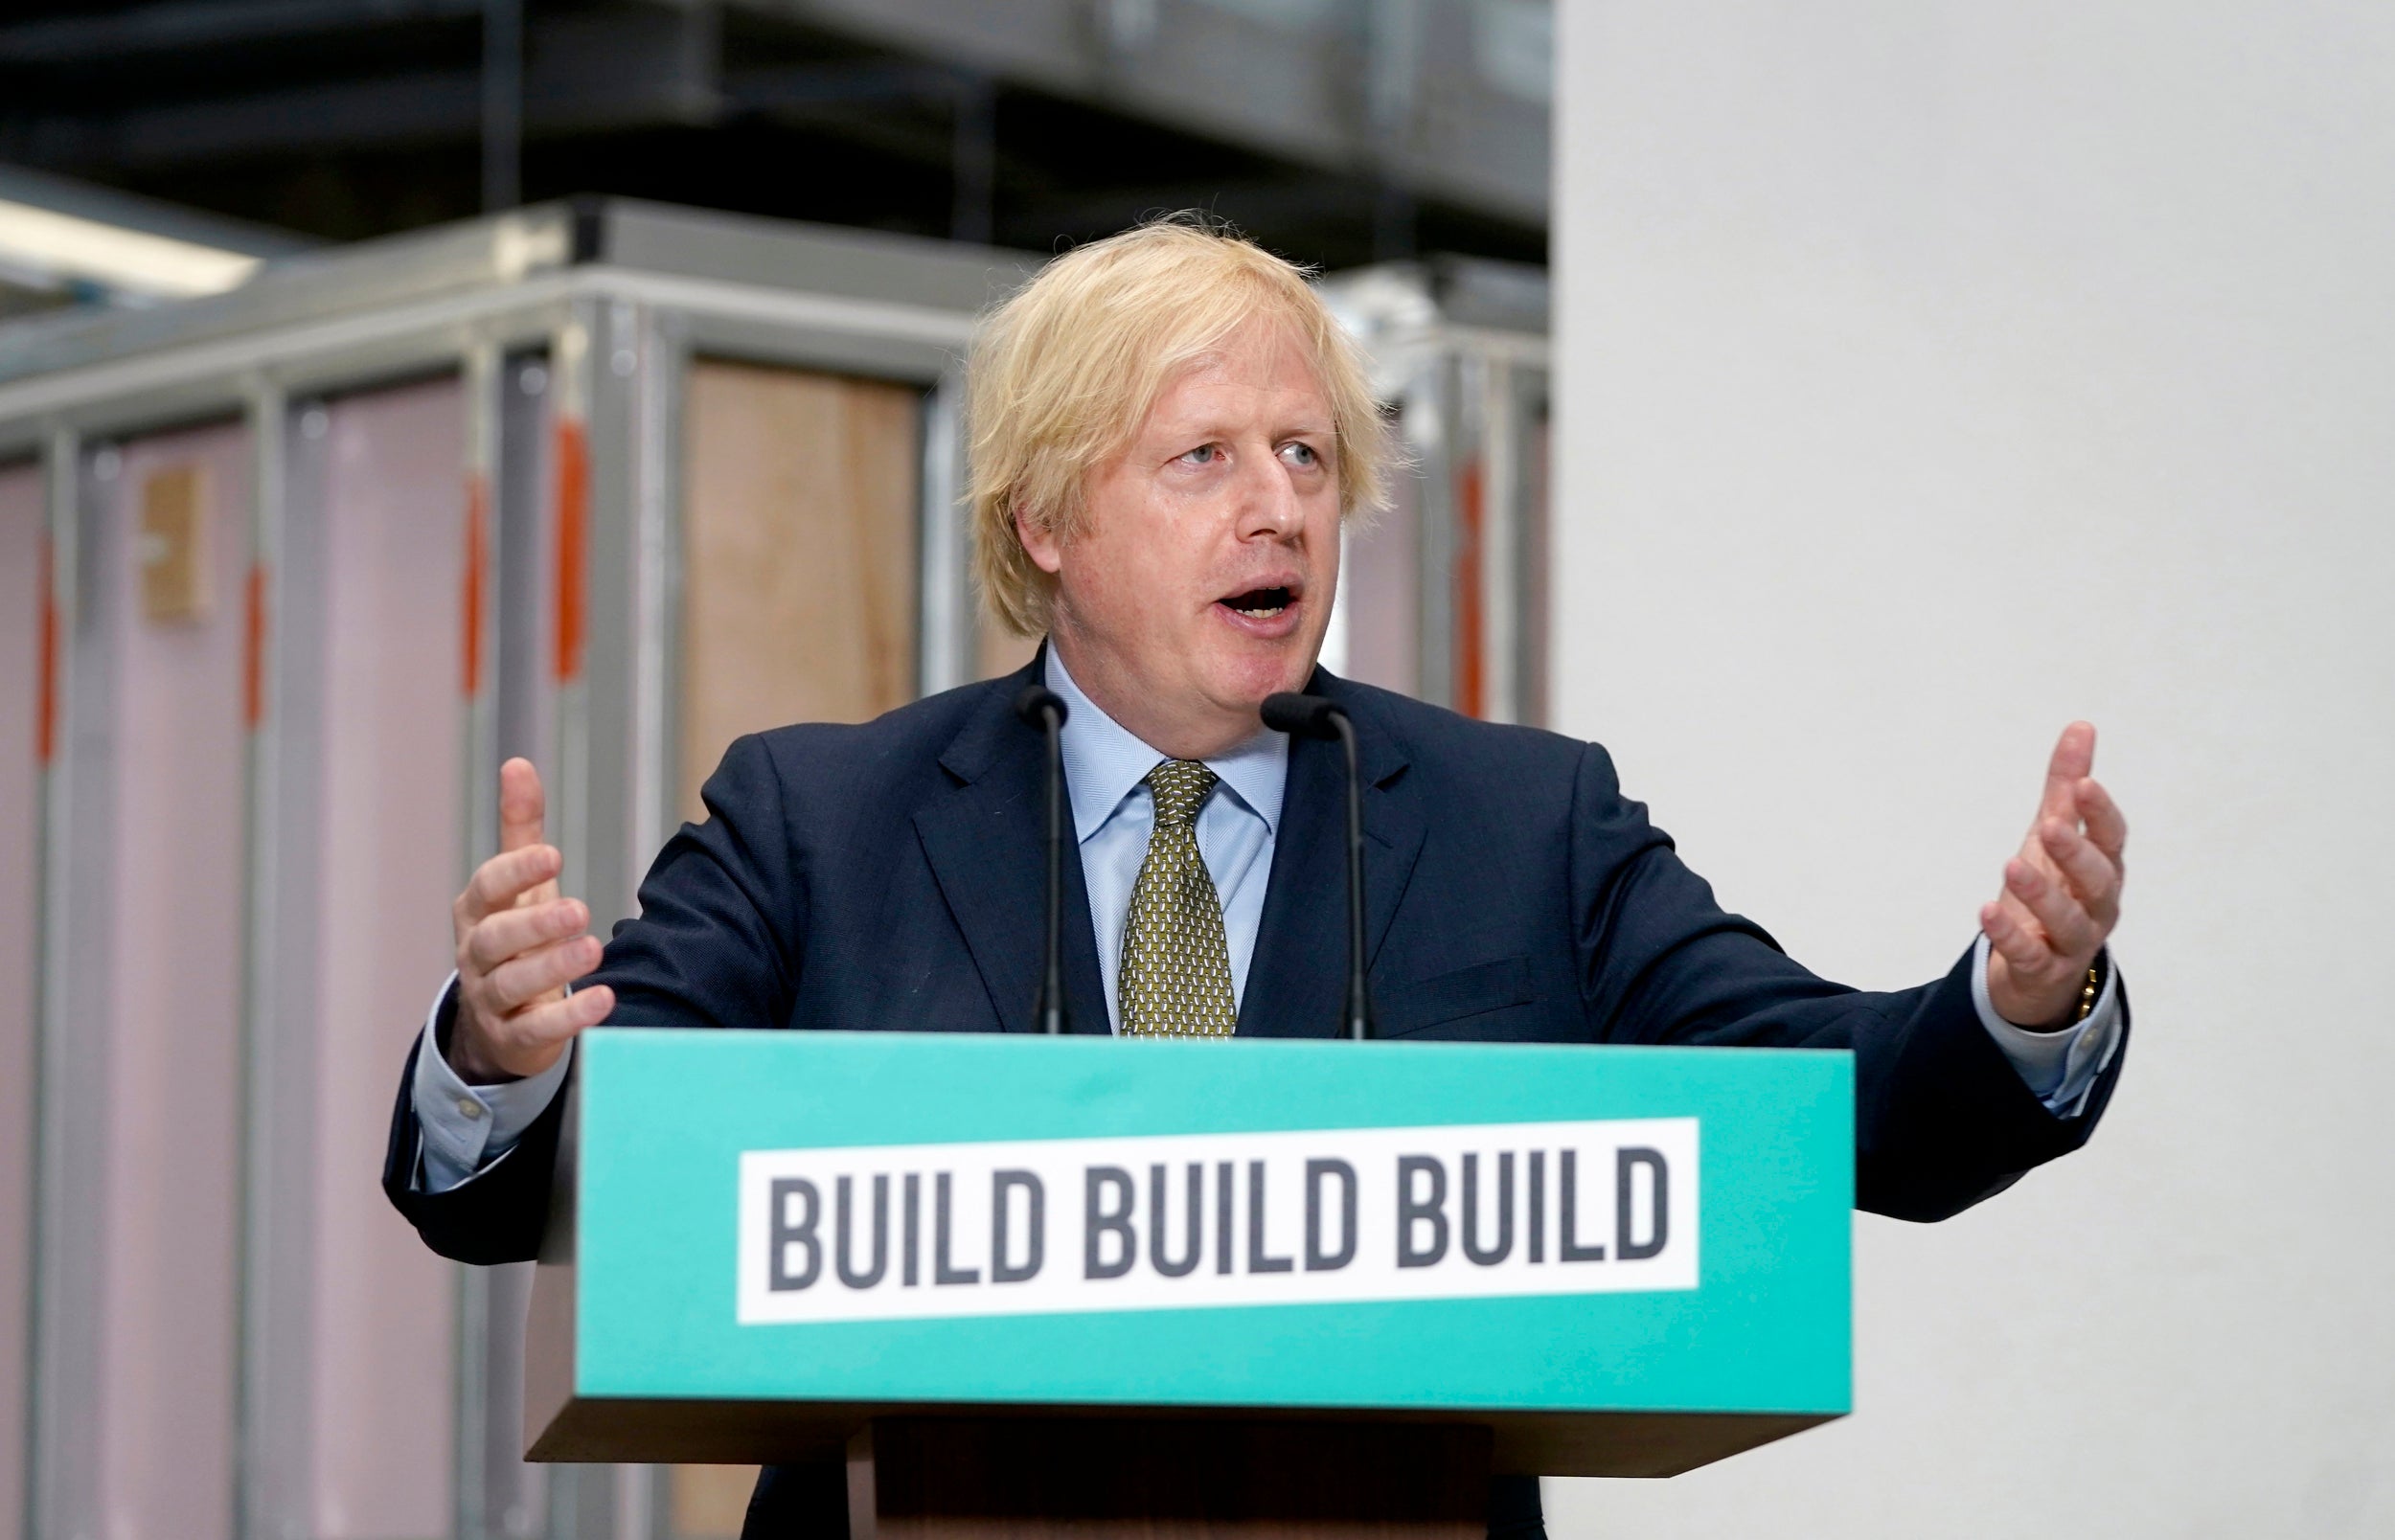 Johnson has suggested the UK will build its way out of recession